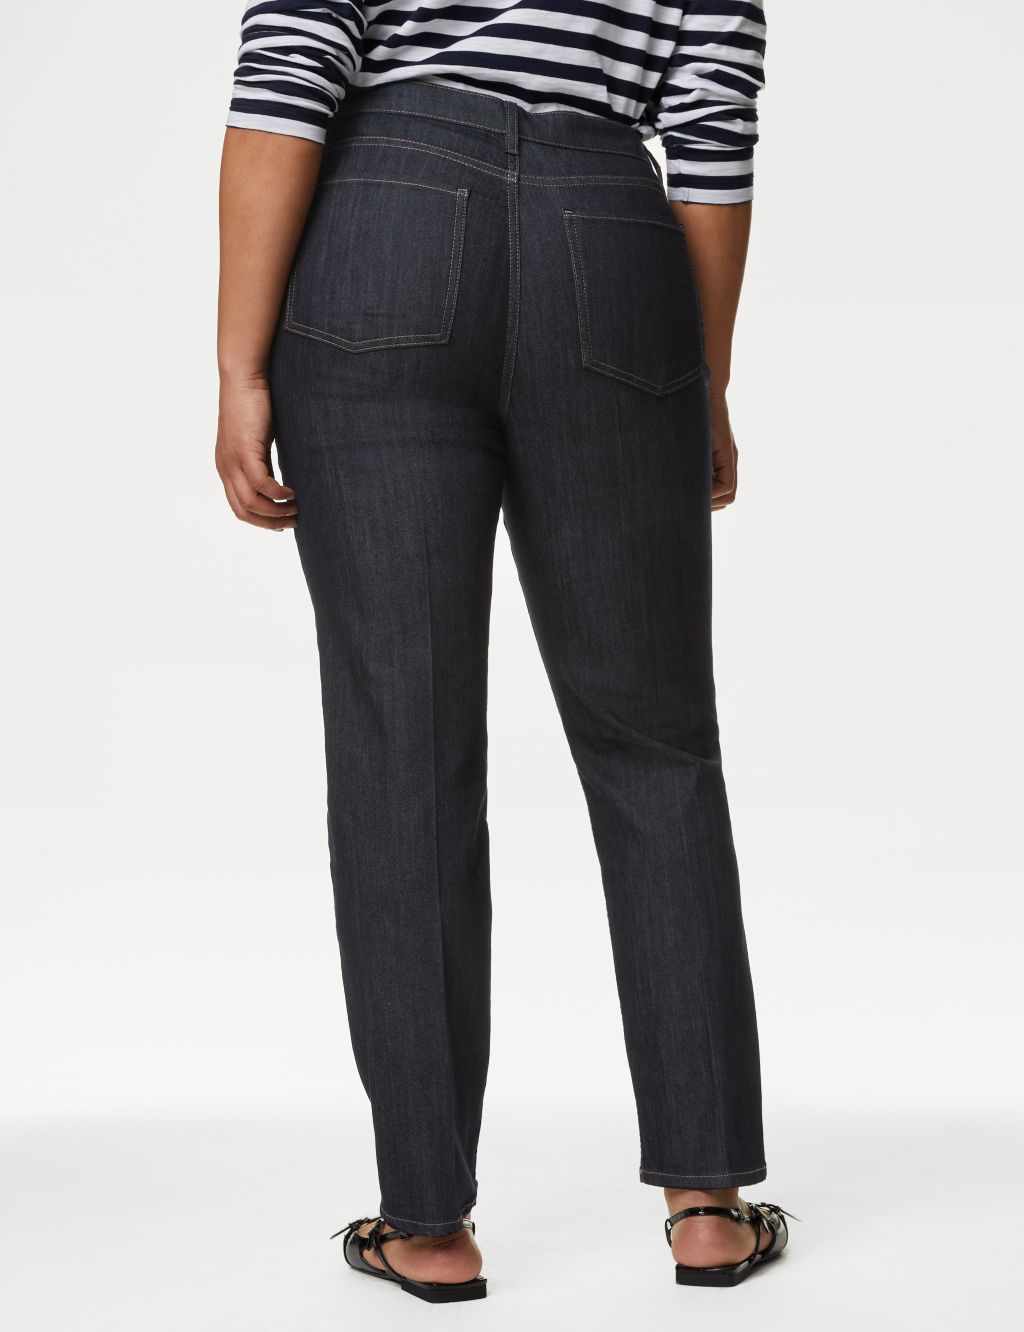 Sienna High Waisted Smart Jeans 4 of 8